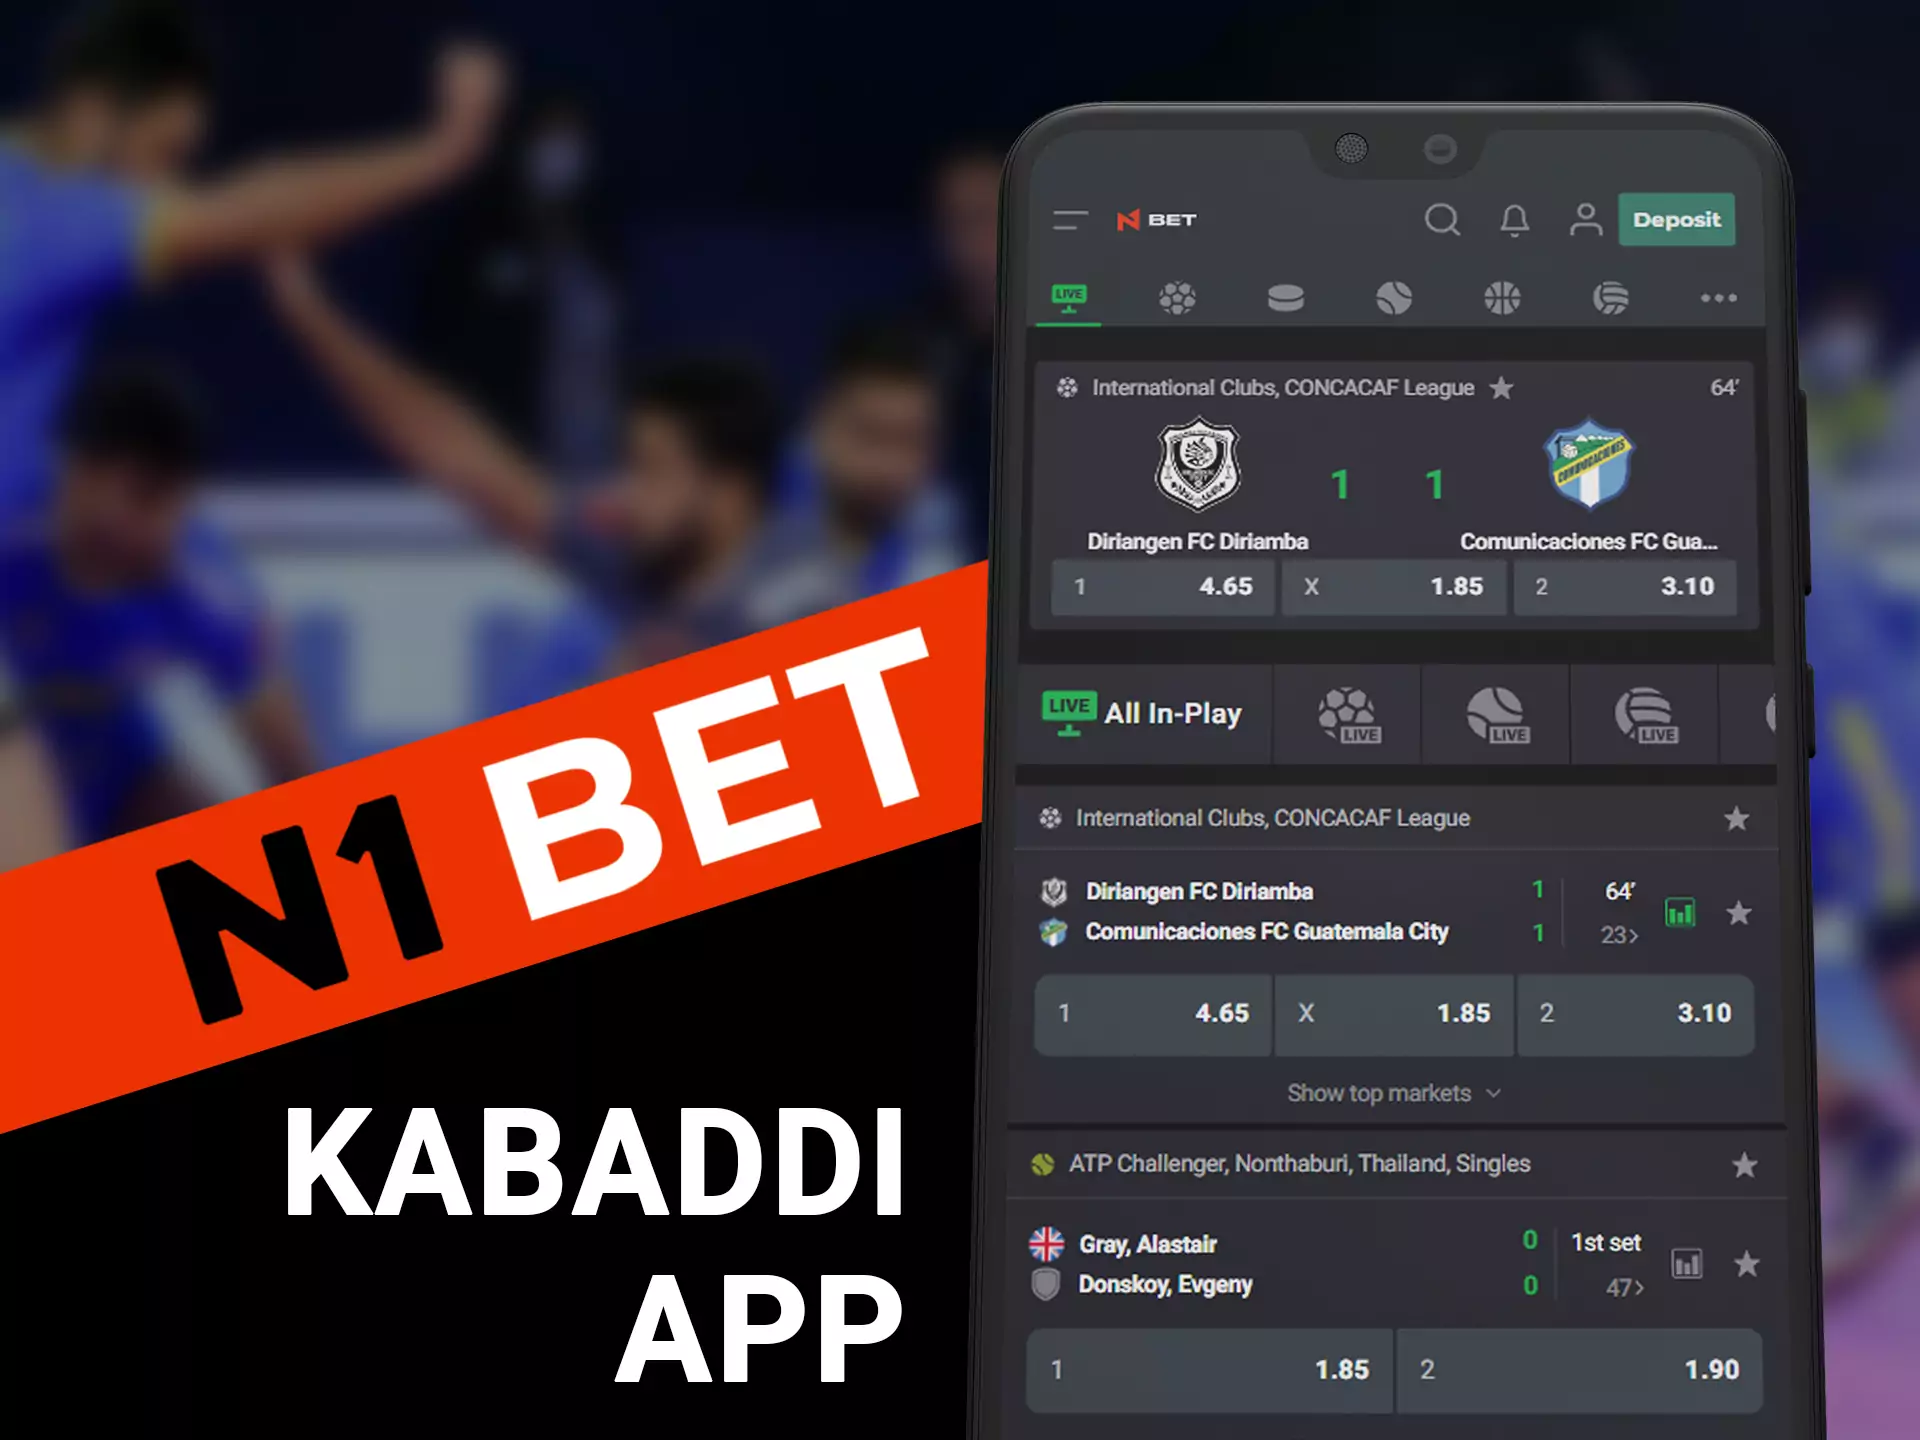 If you like betting on kabaddi. N1Bet app is your choice.